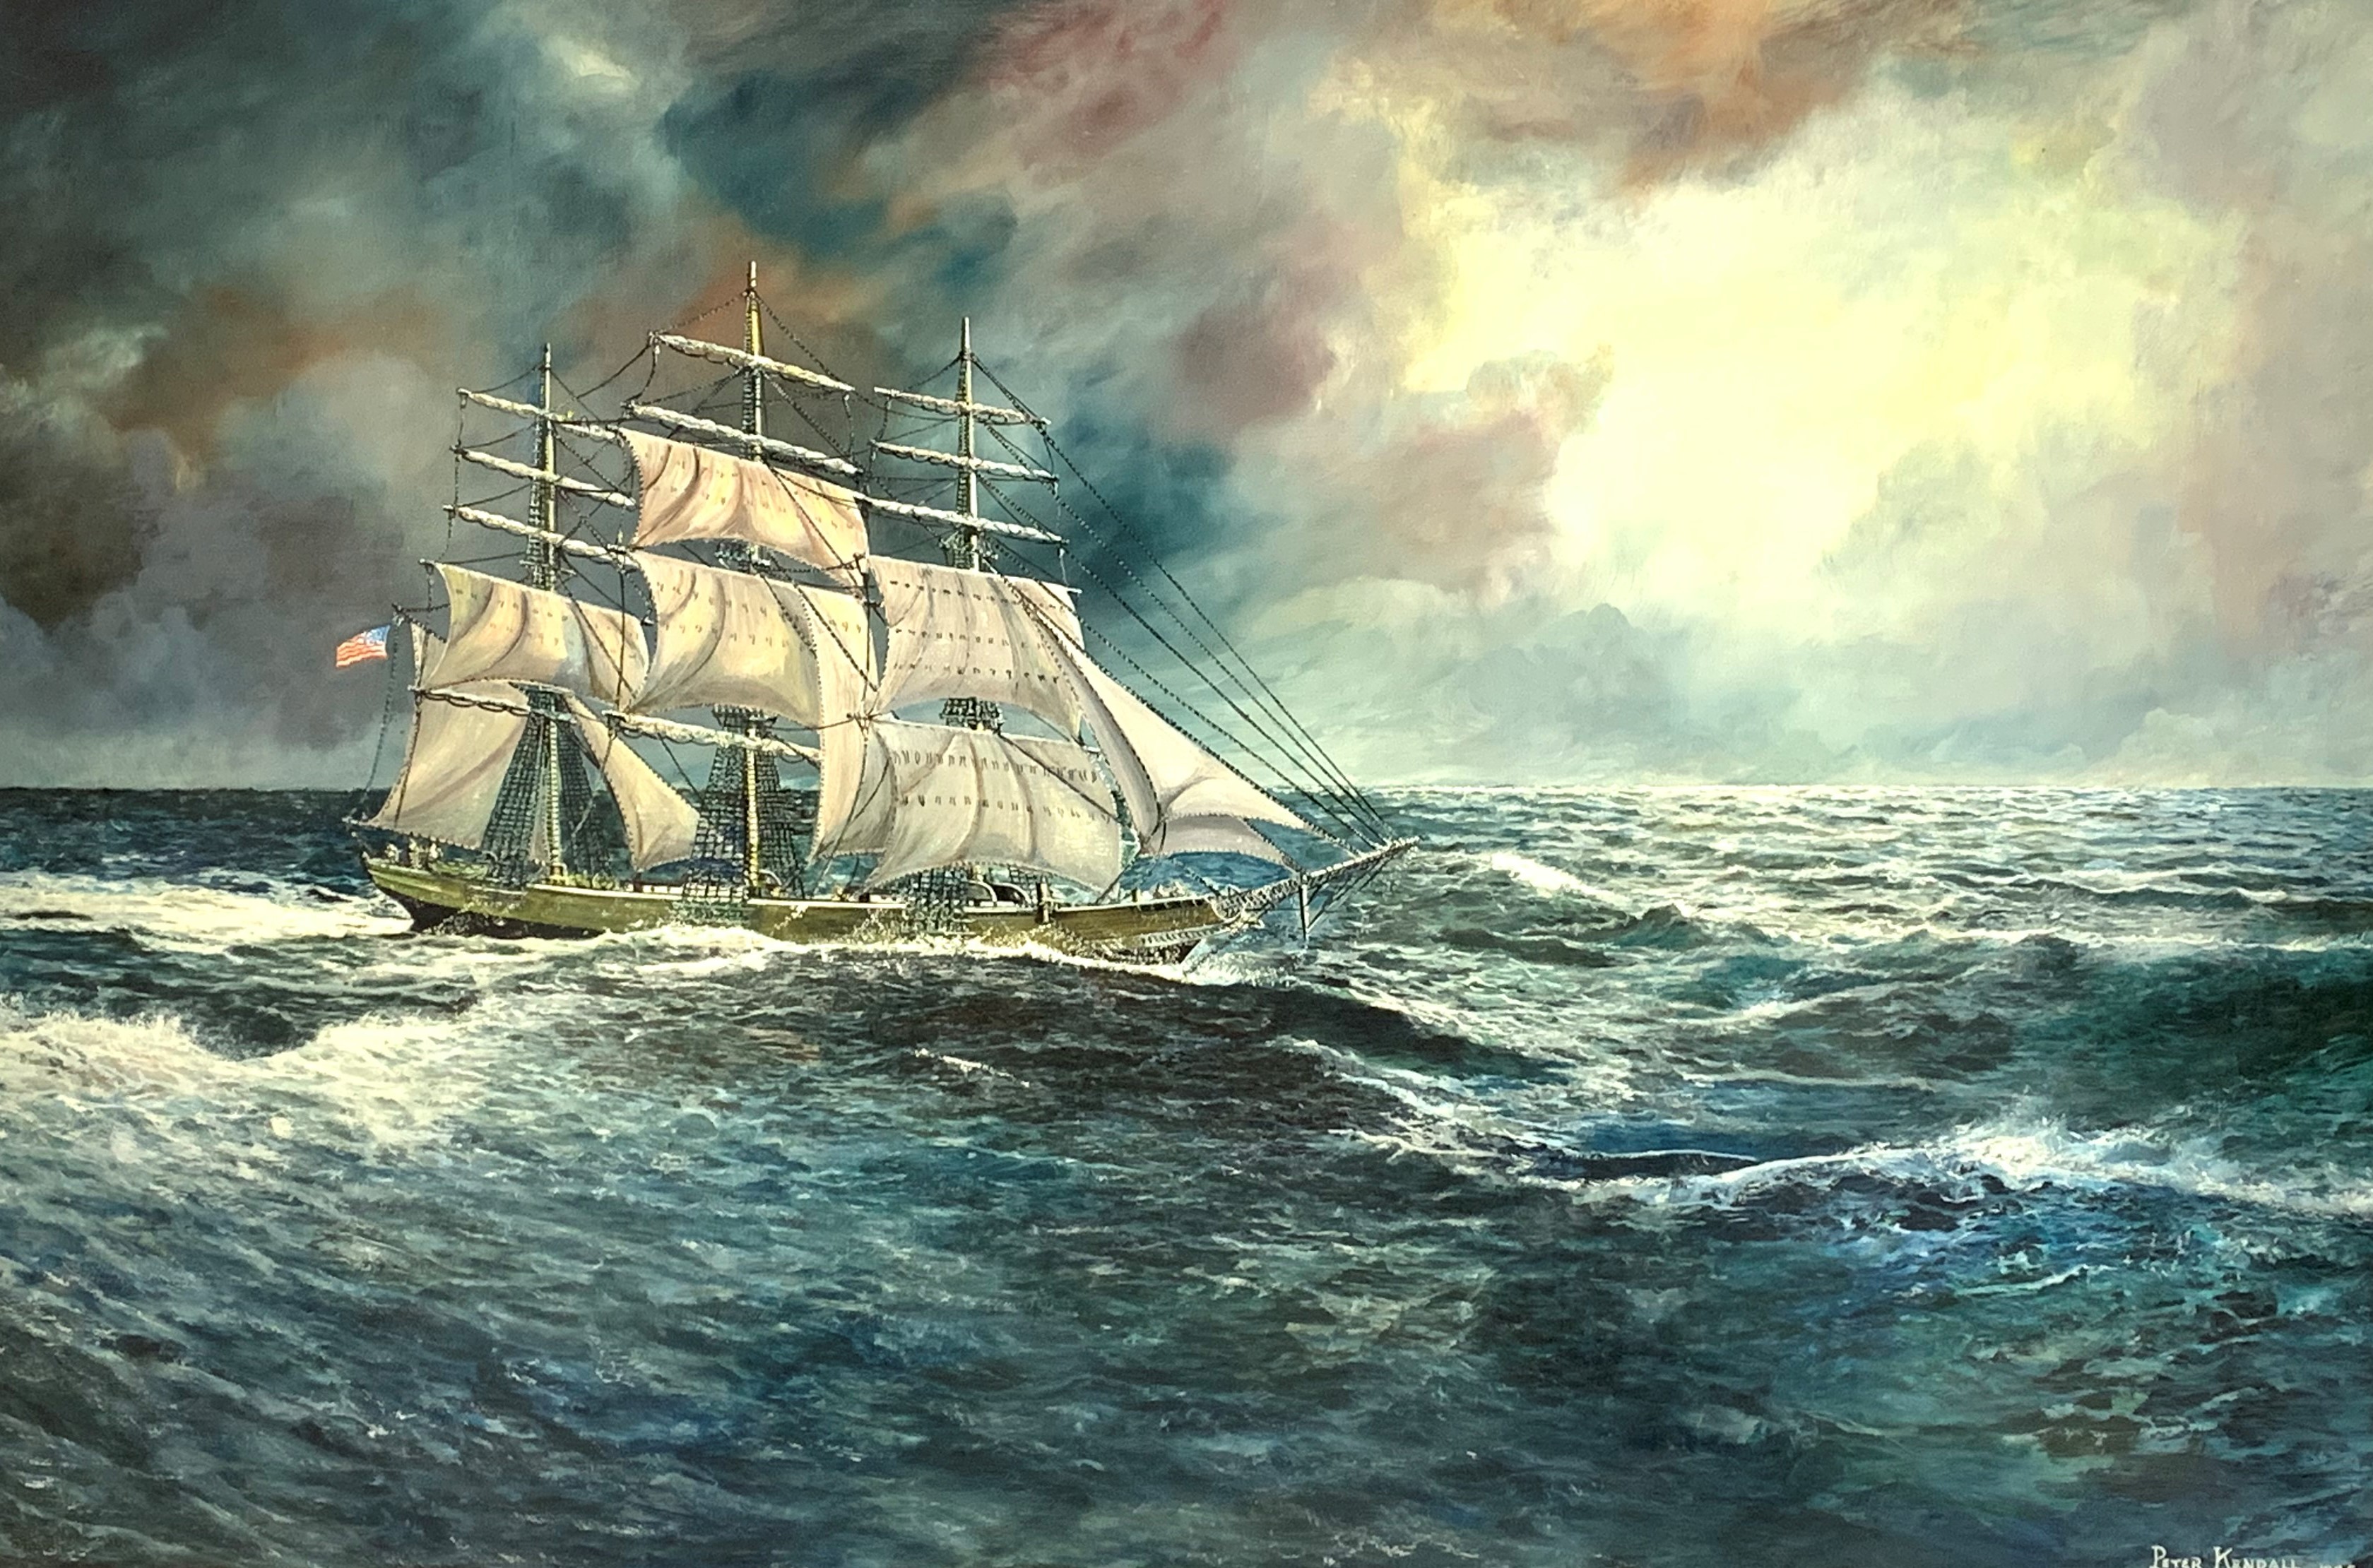 Peter Kendall 'The American Clipper Lightening' oil on canvas, signed and dated 1985,